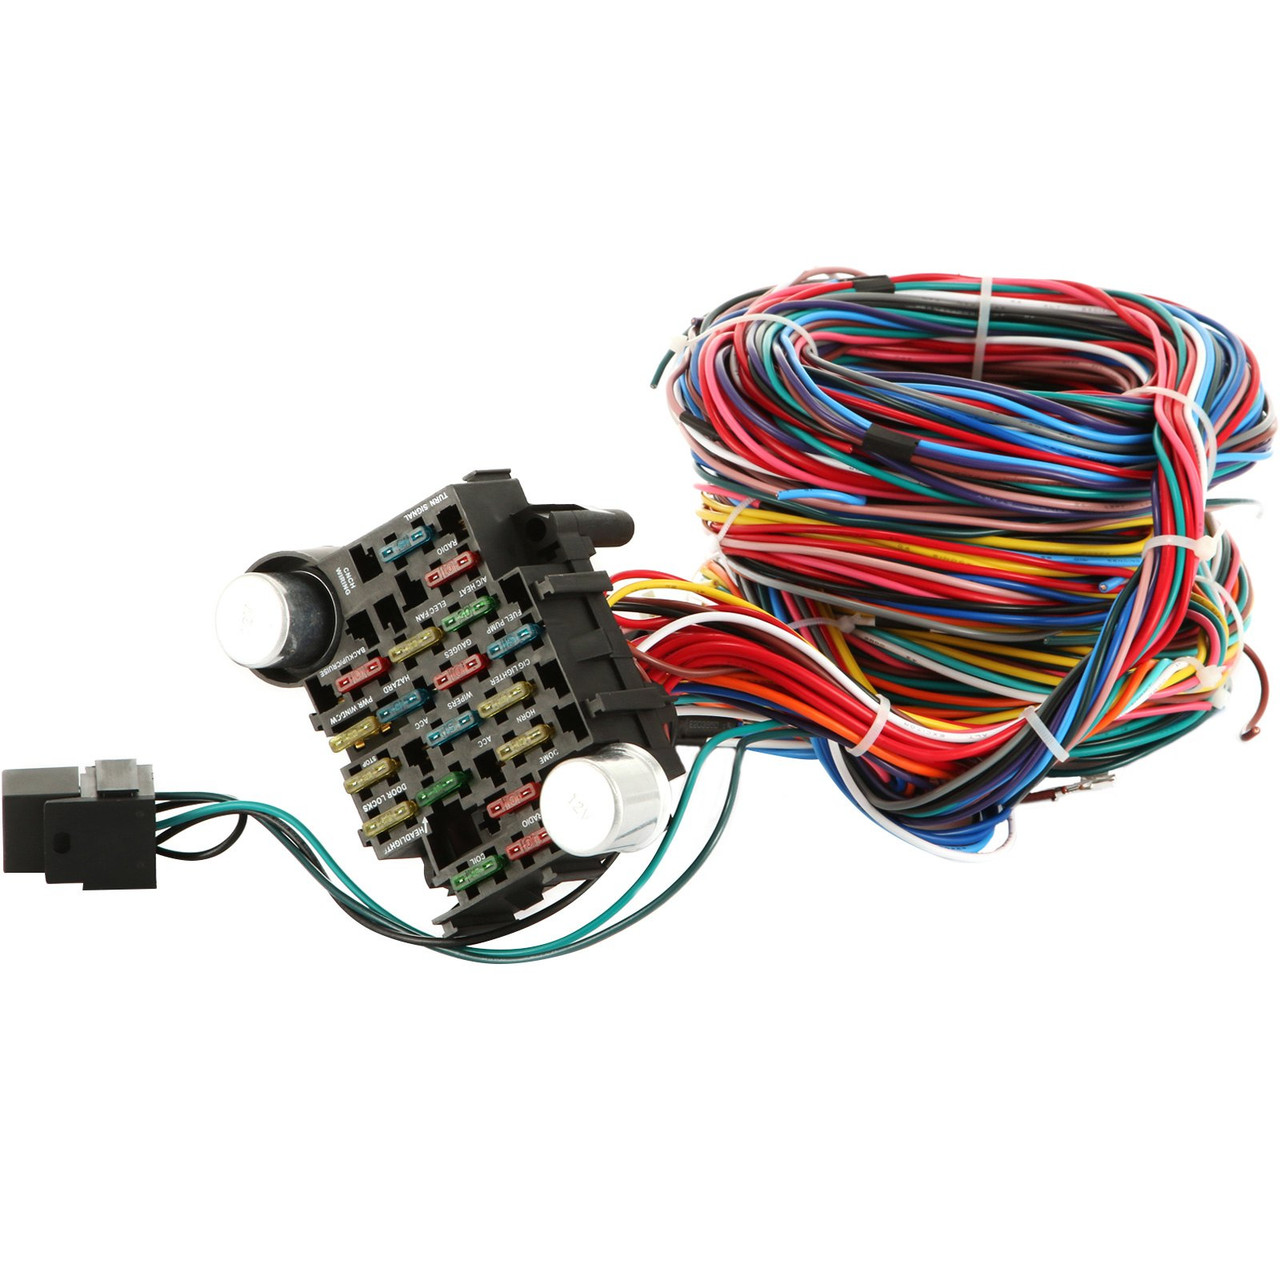 21 Circuit Wiring Harness Kit Long Wires Wiring Harness 21 standard Color Wiring Harness Kit